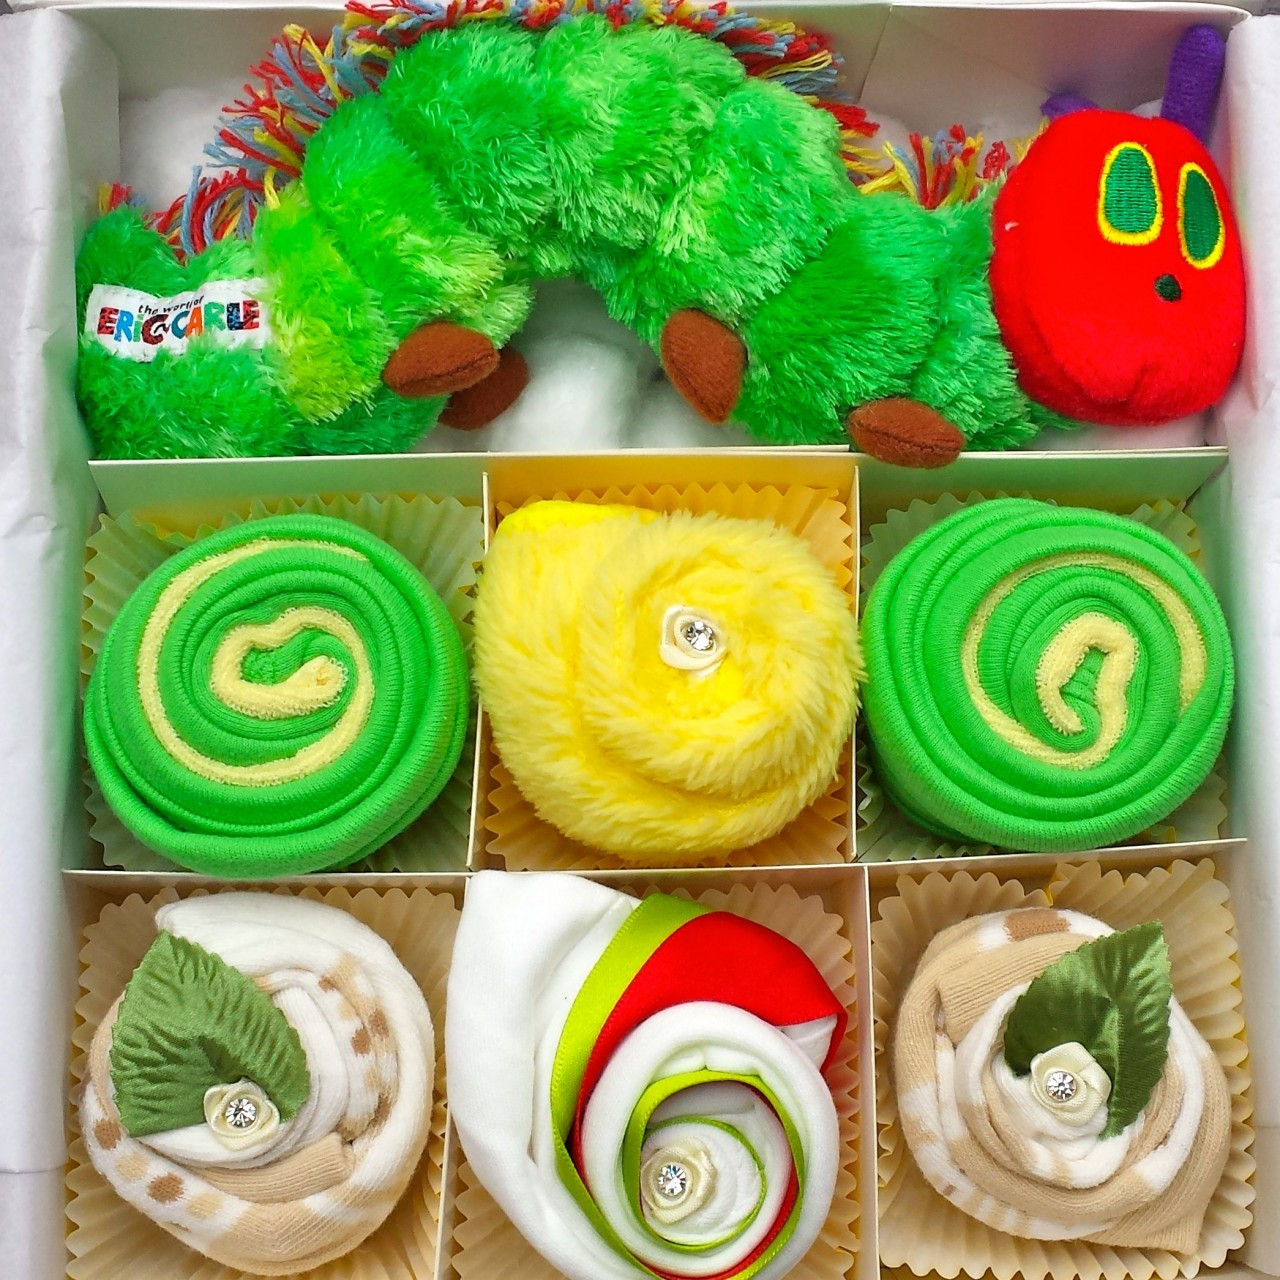 Baby Clothes Cupcakes
 Hungry caterpillar baby clothing cupcakes Deluxe